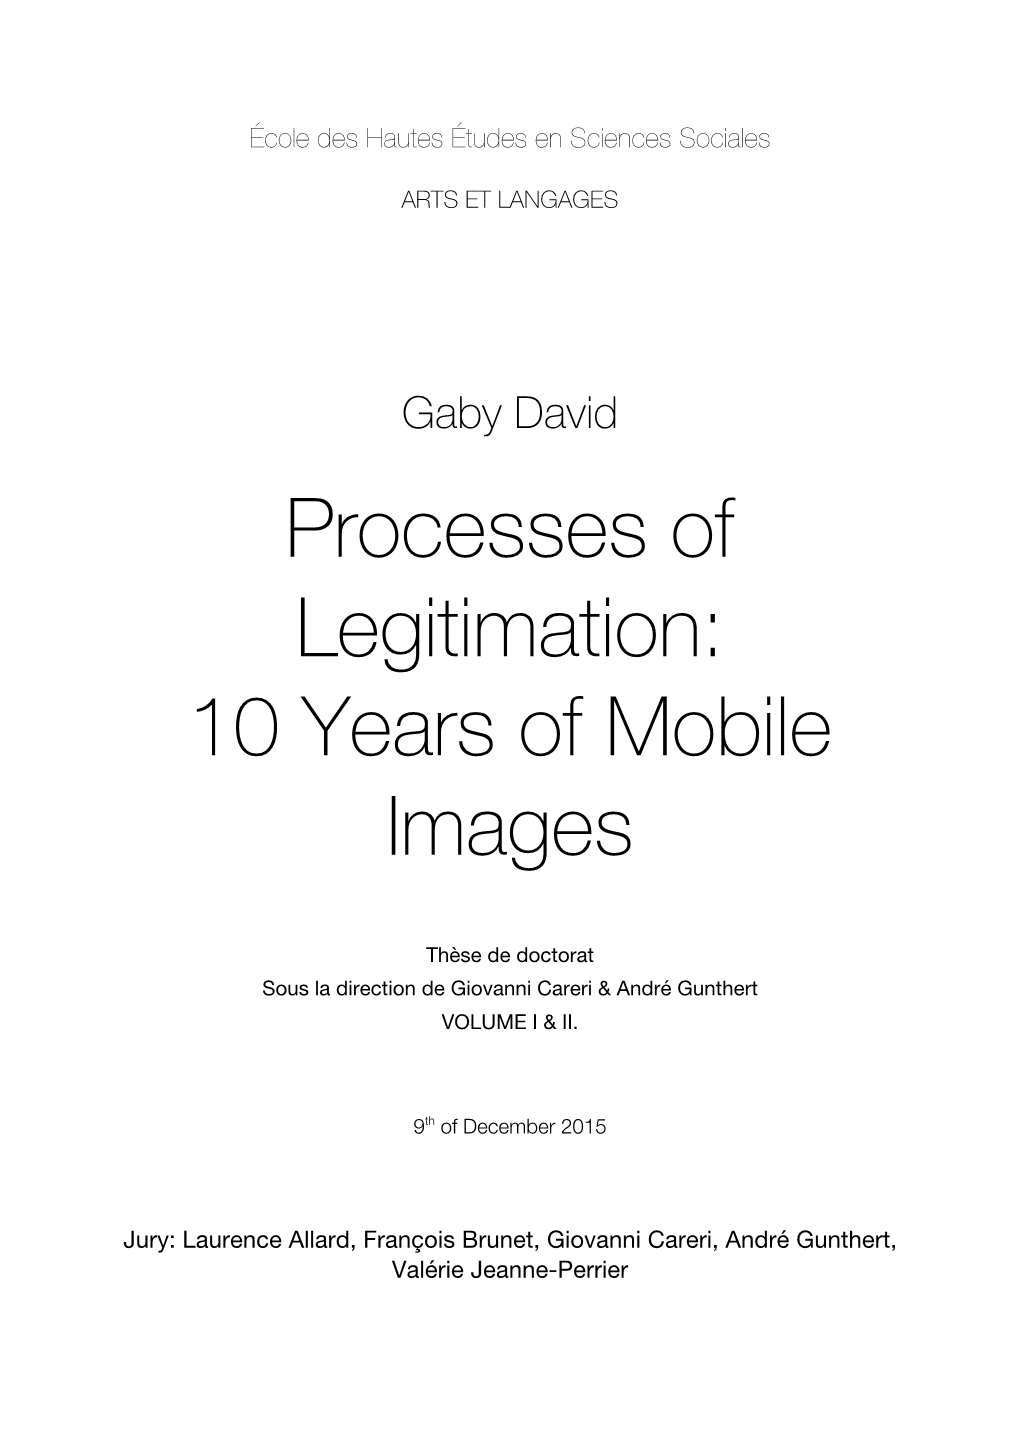 Processes of Legitimation: 10 Years of Mobile Images